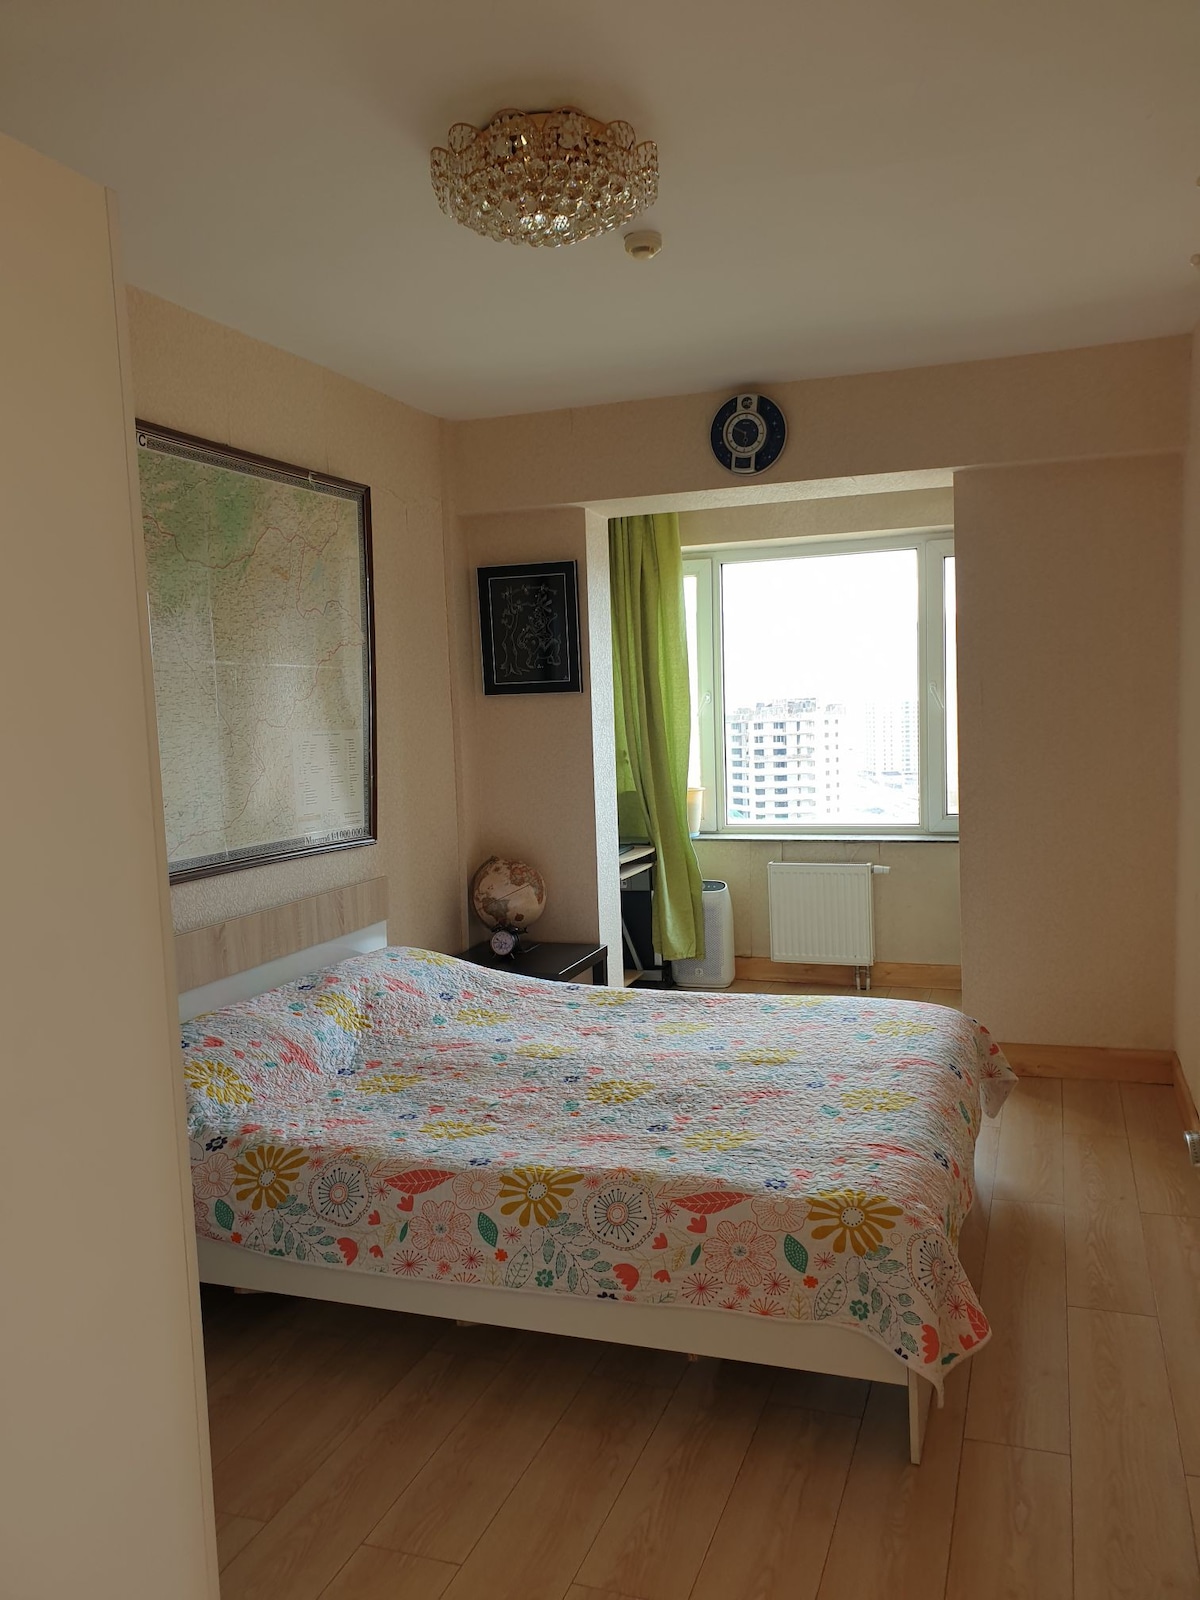 Fully equipped rooms
3.4 km away from downtown